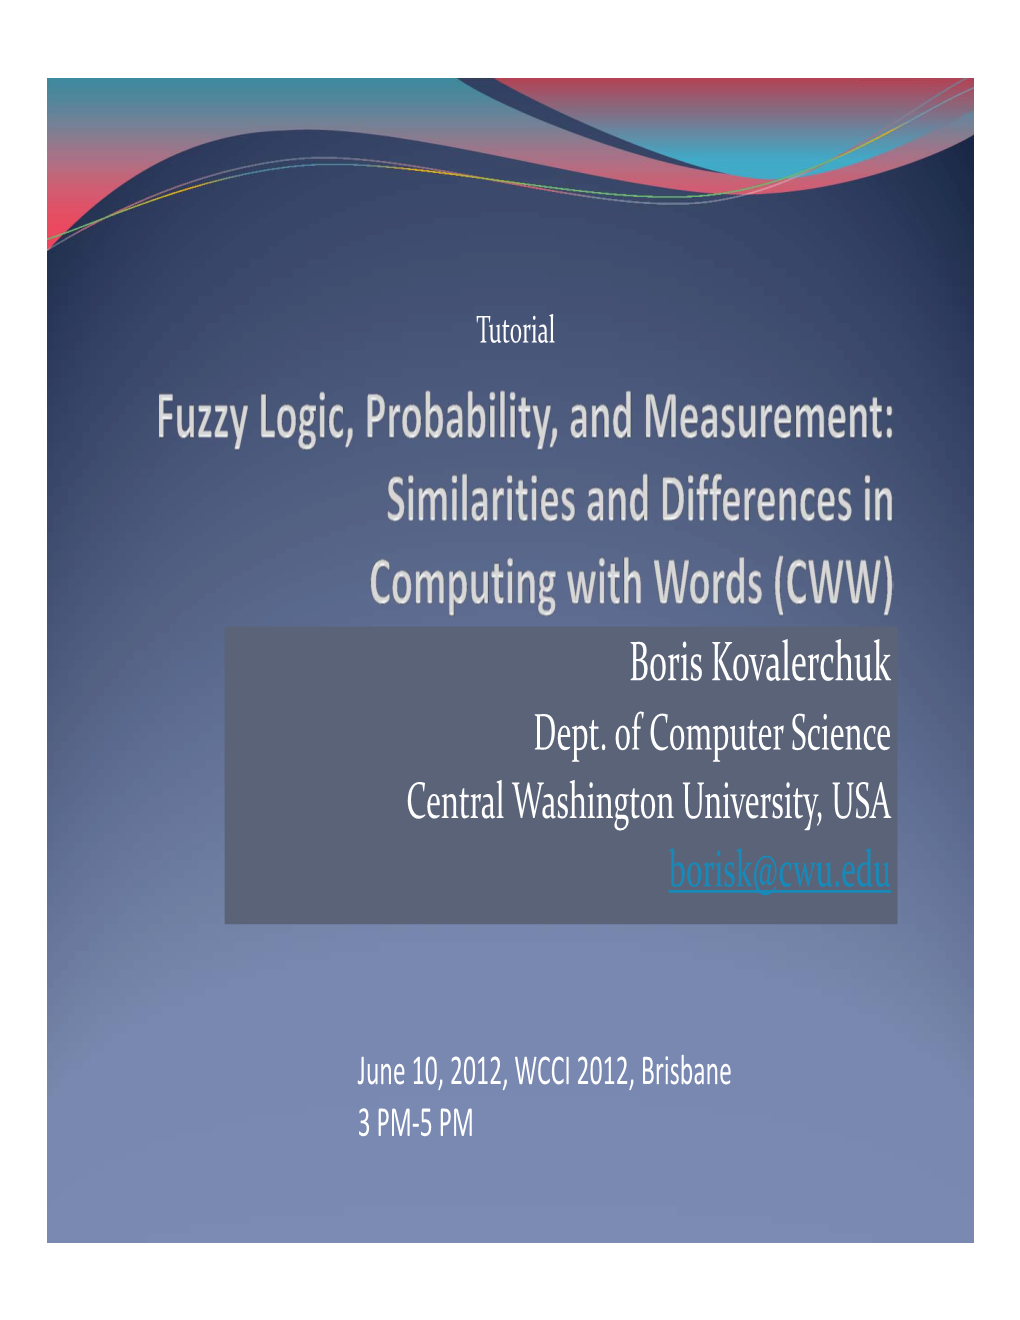 Fuzzy Logic, Probability, and Measurement for CWW  L